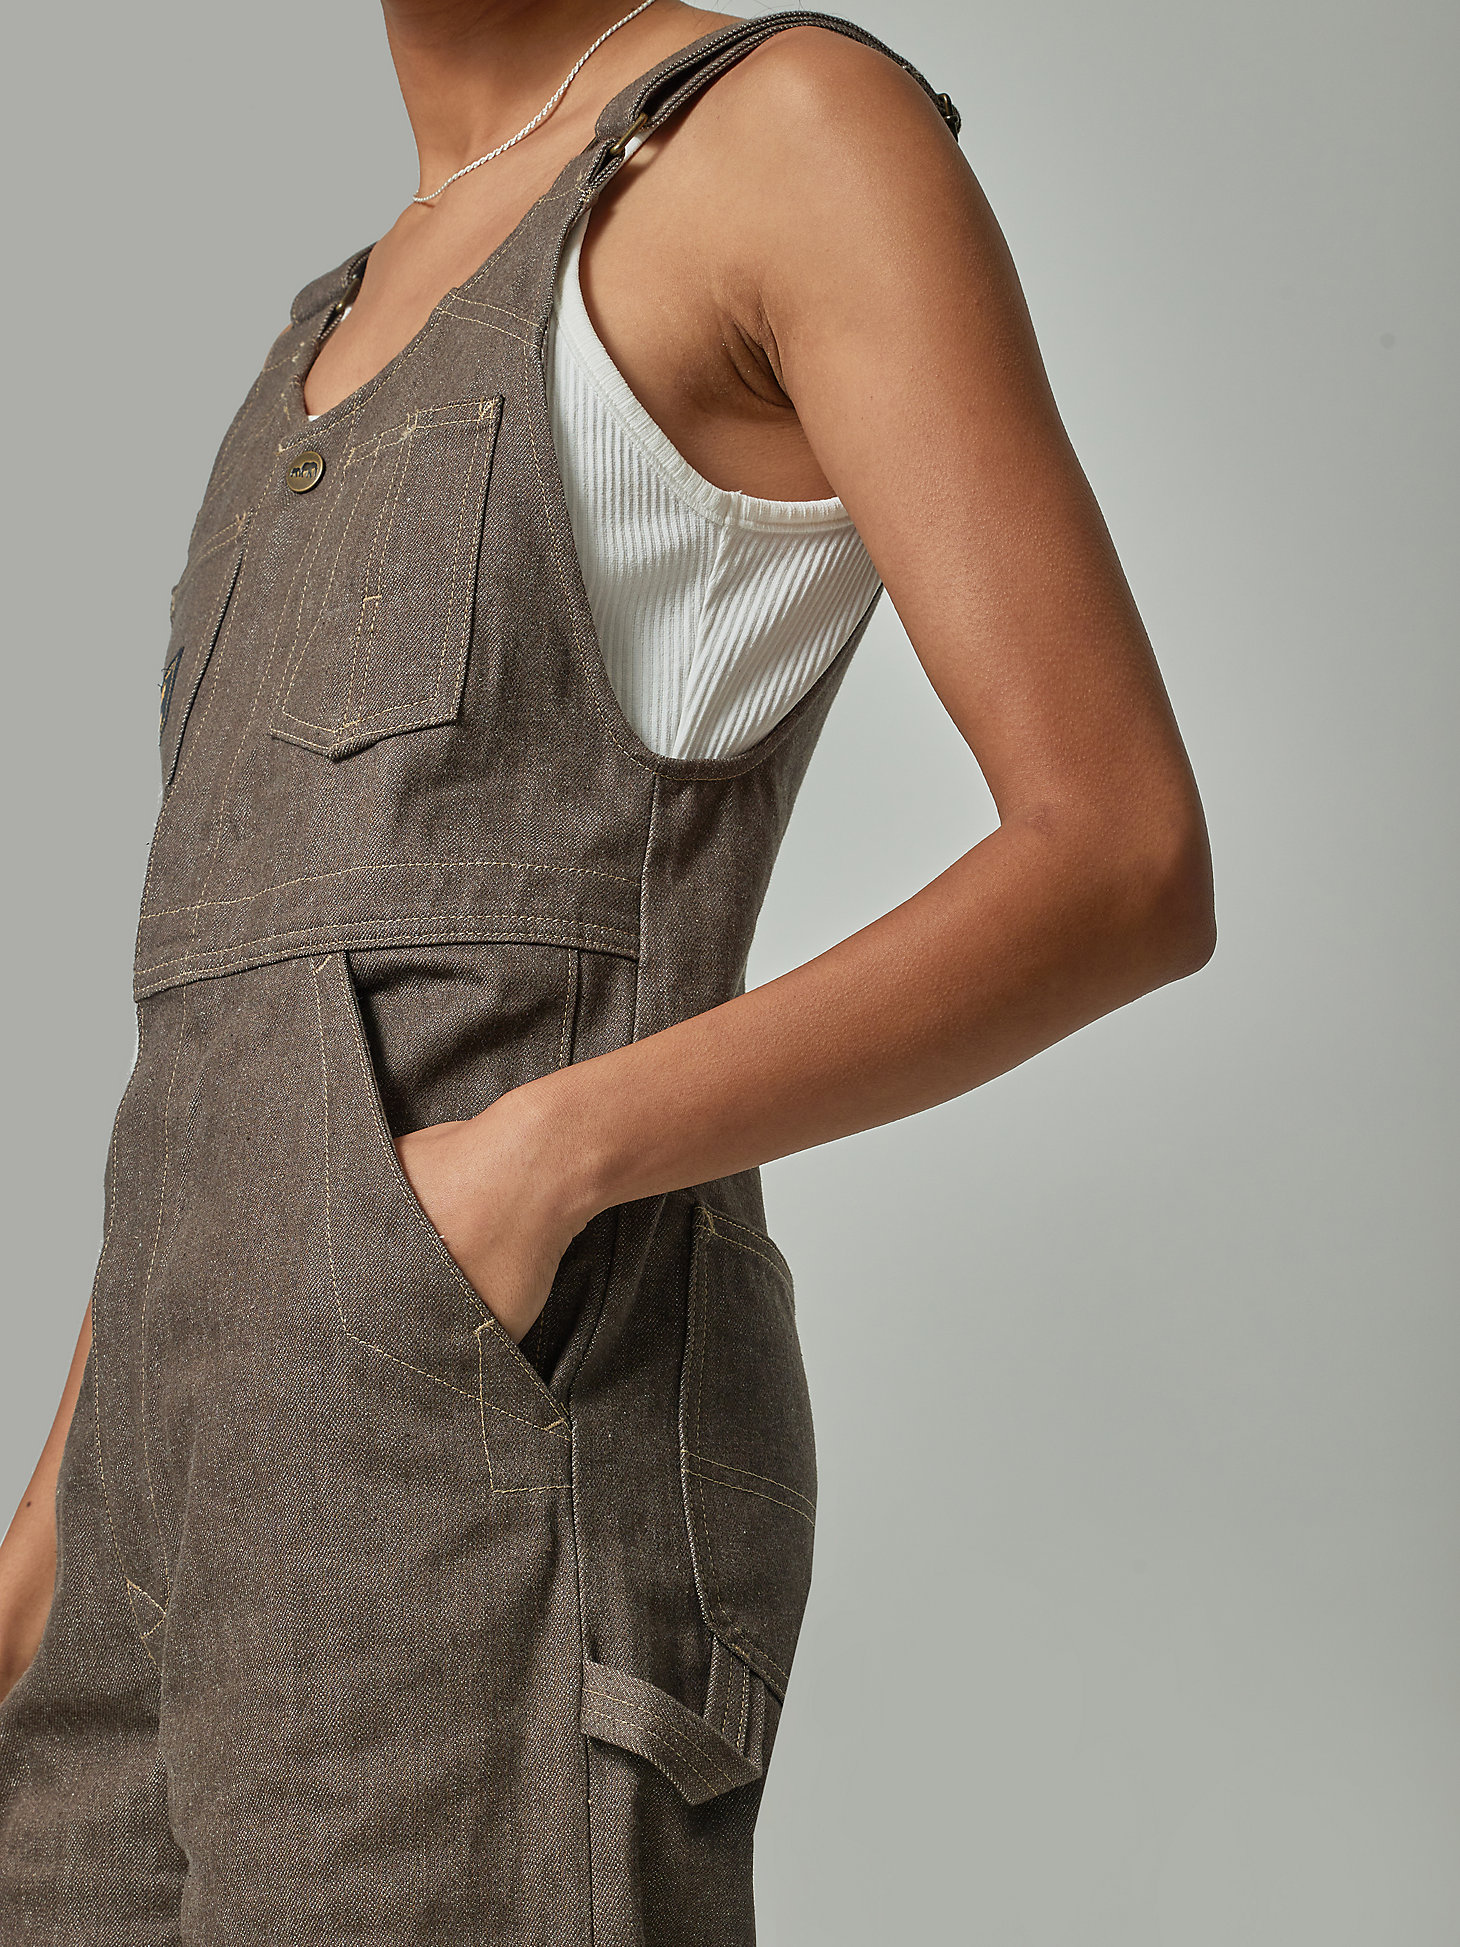 Lee® x The Brooklyn Circus® Whizit Overall in Brown alternative view 3